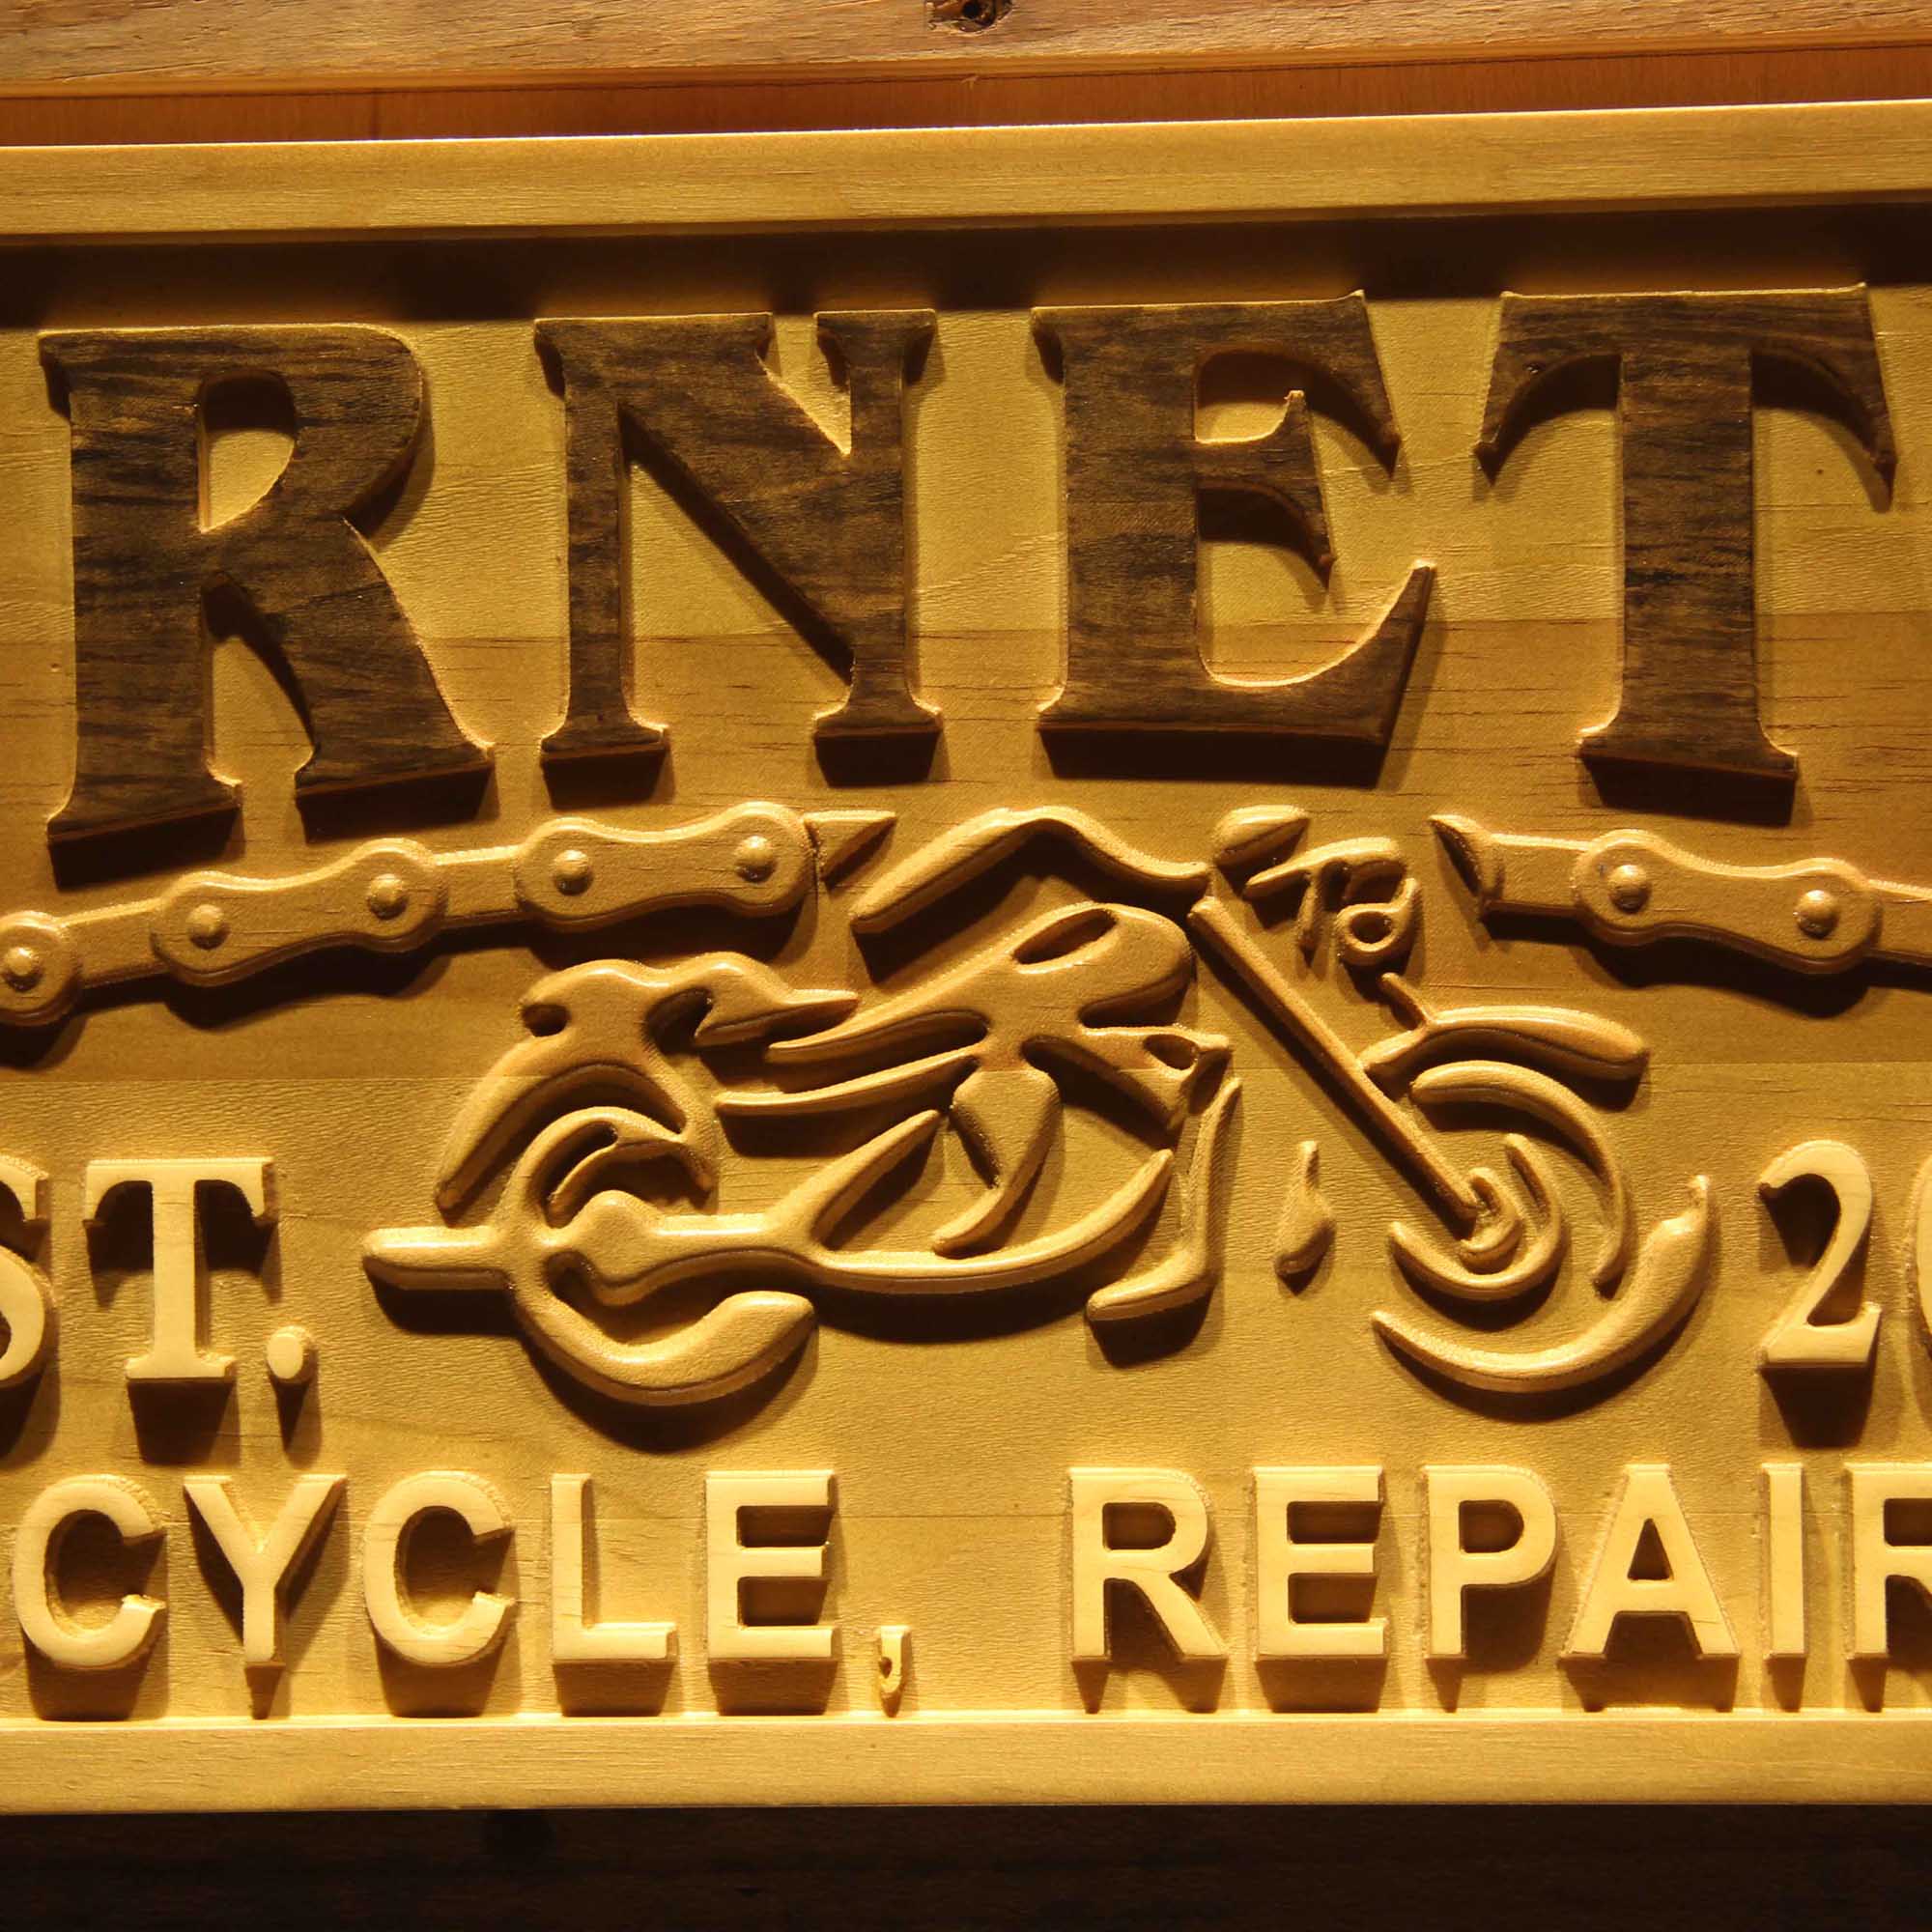 Personalized Motorcycle Repair & BAR Man Cave Garage Gifts Wood Engraved Wooden Sign